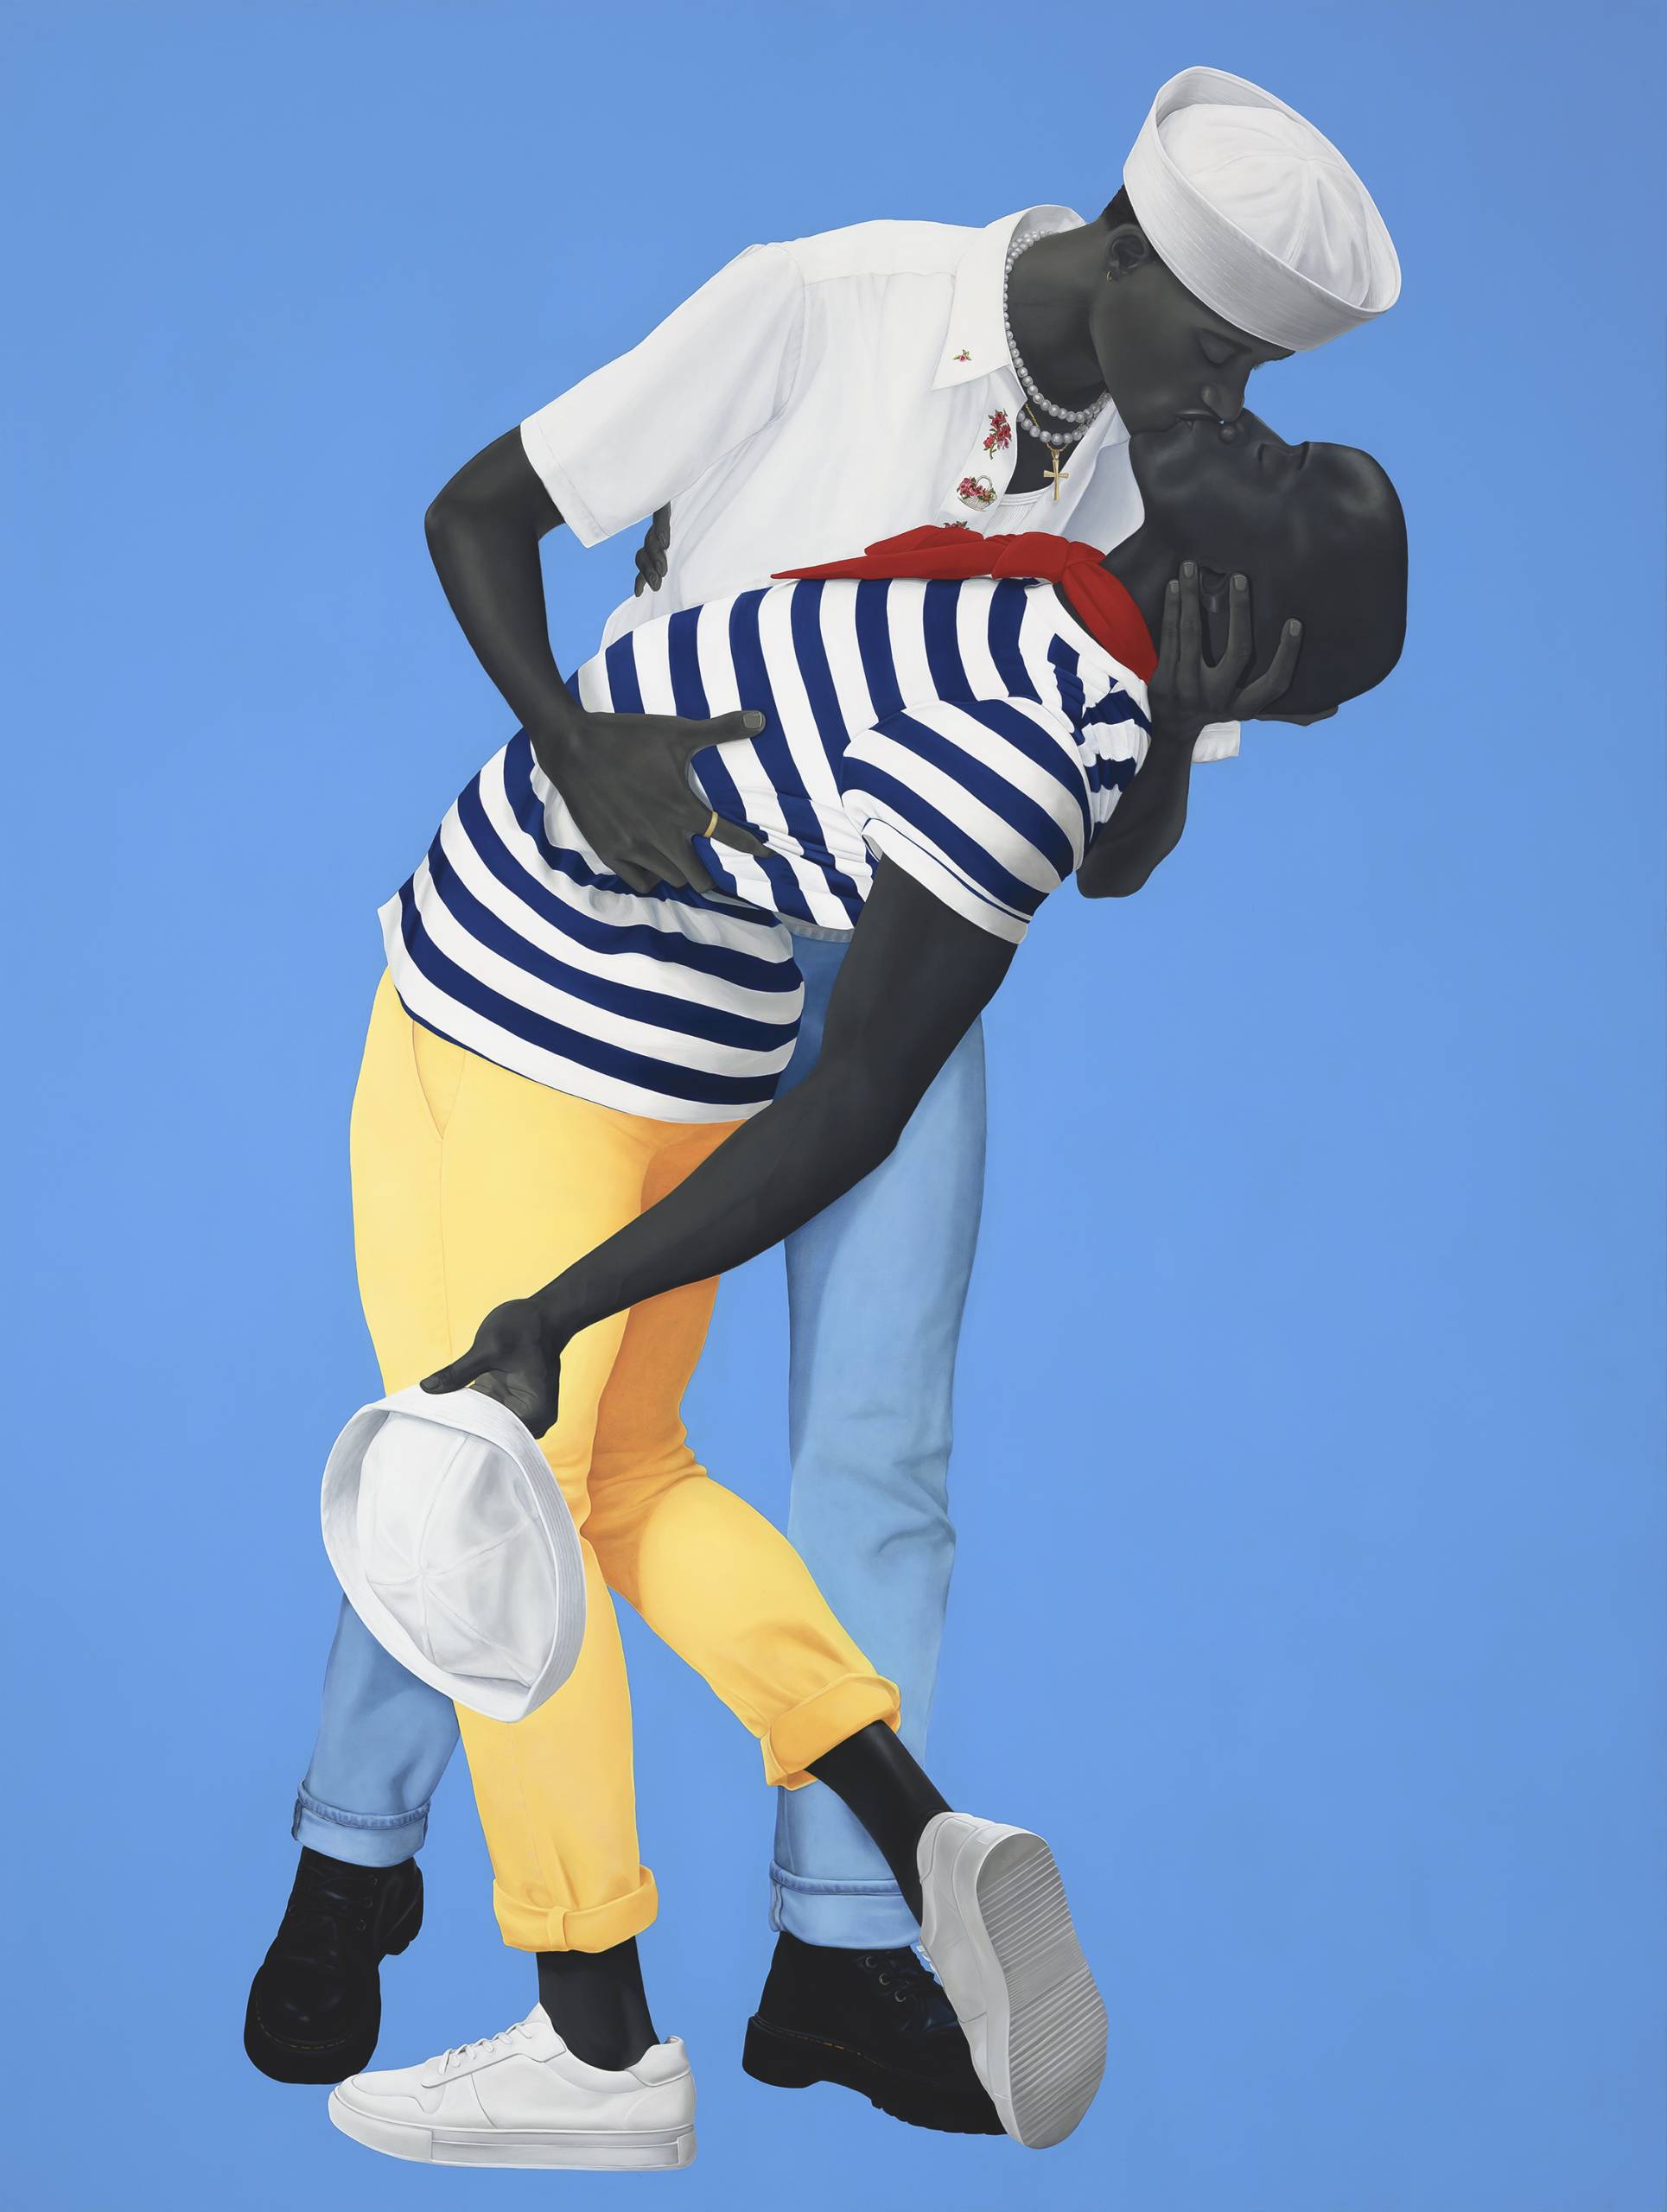 Two grayscale figures kiss in dramatic pose wearing sailor-like clothes against blue background